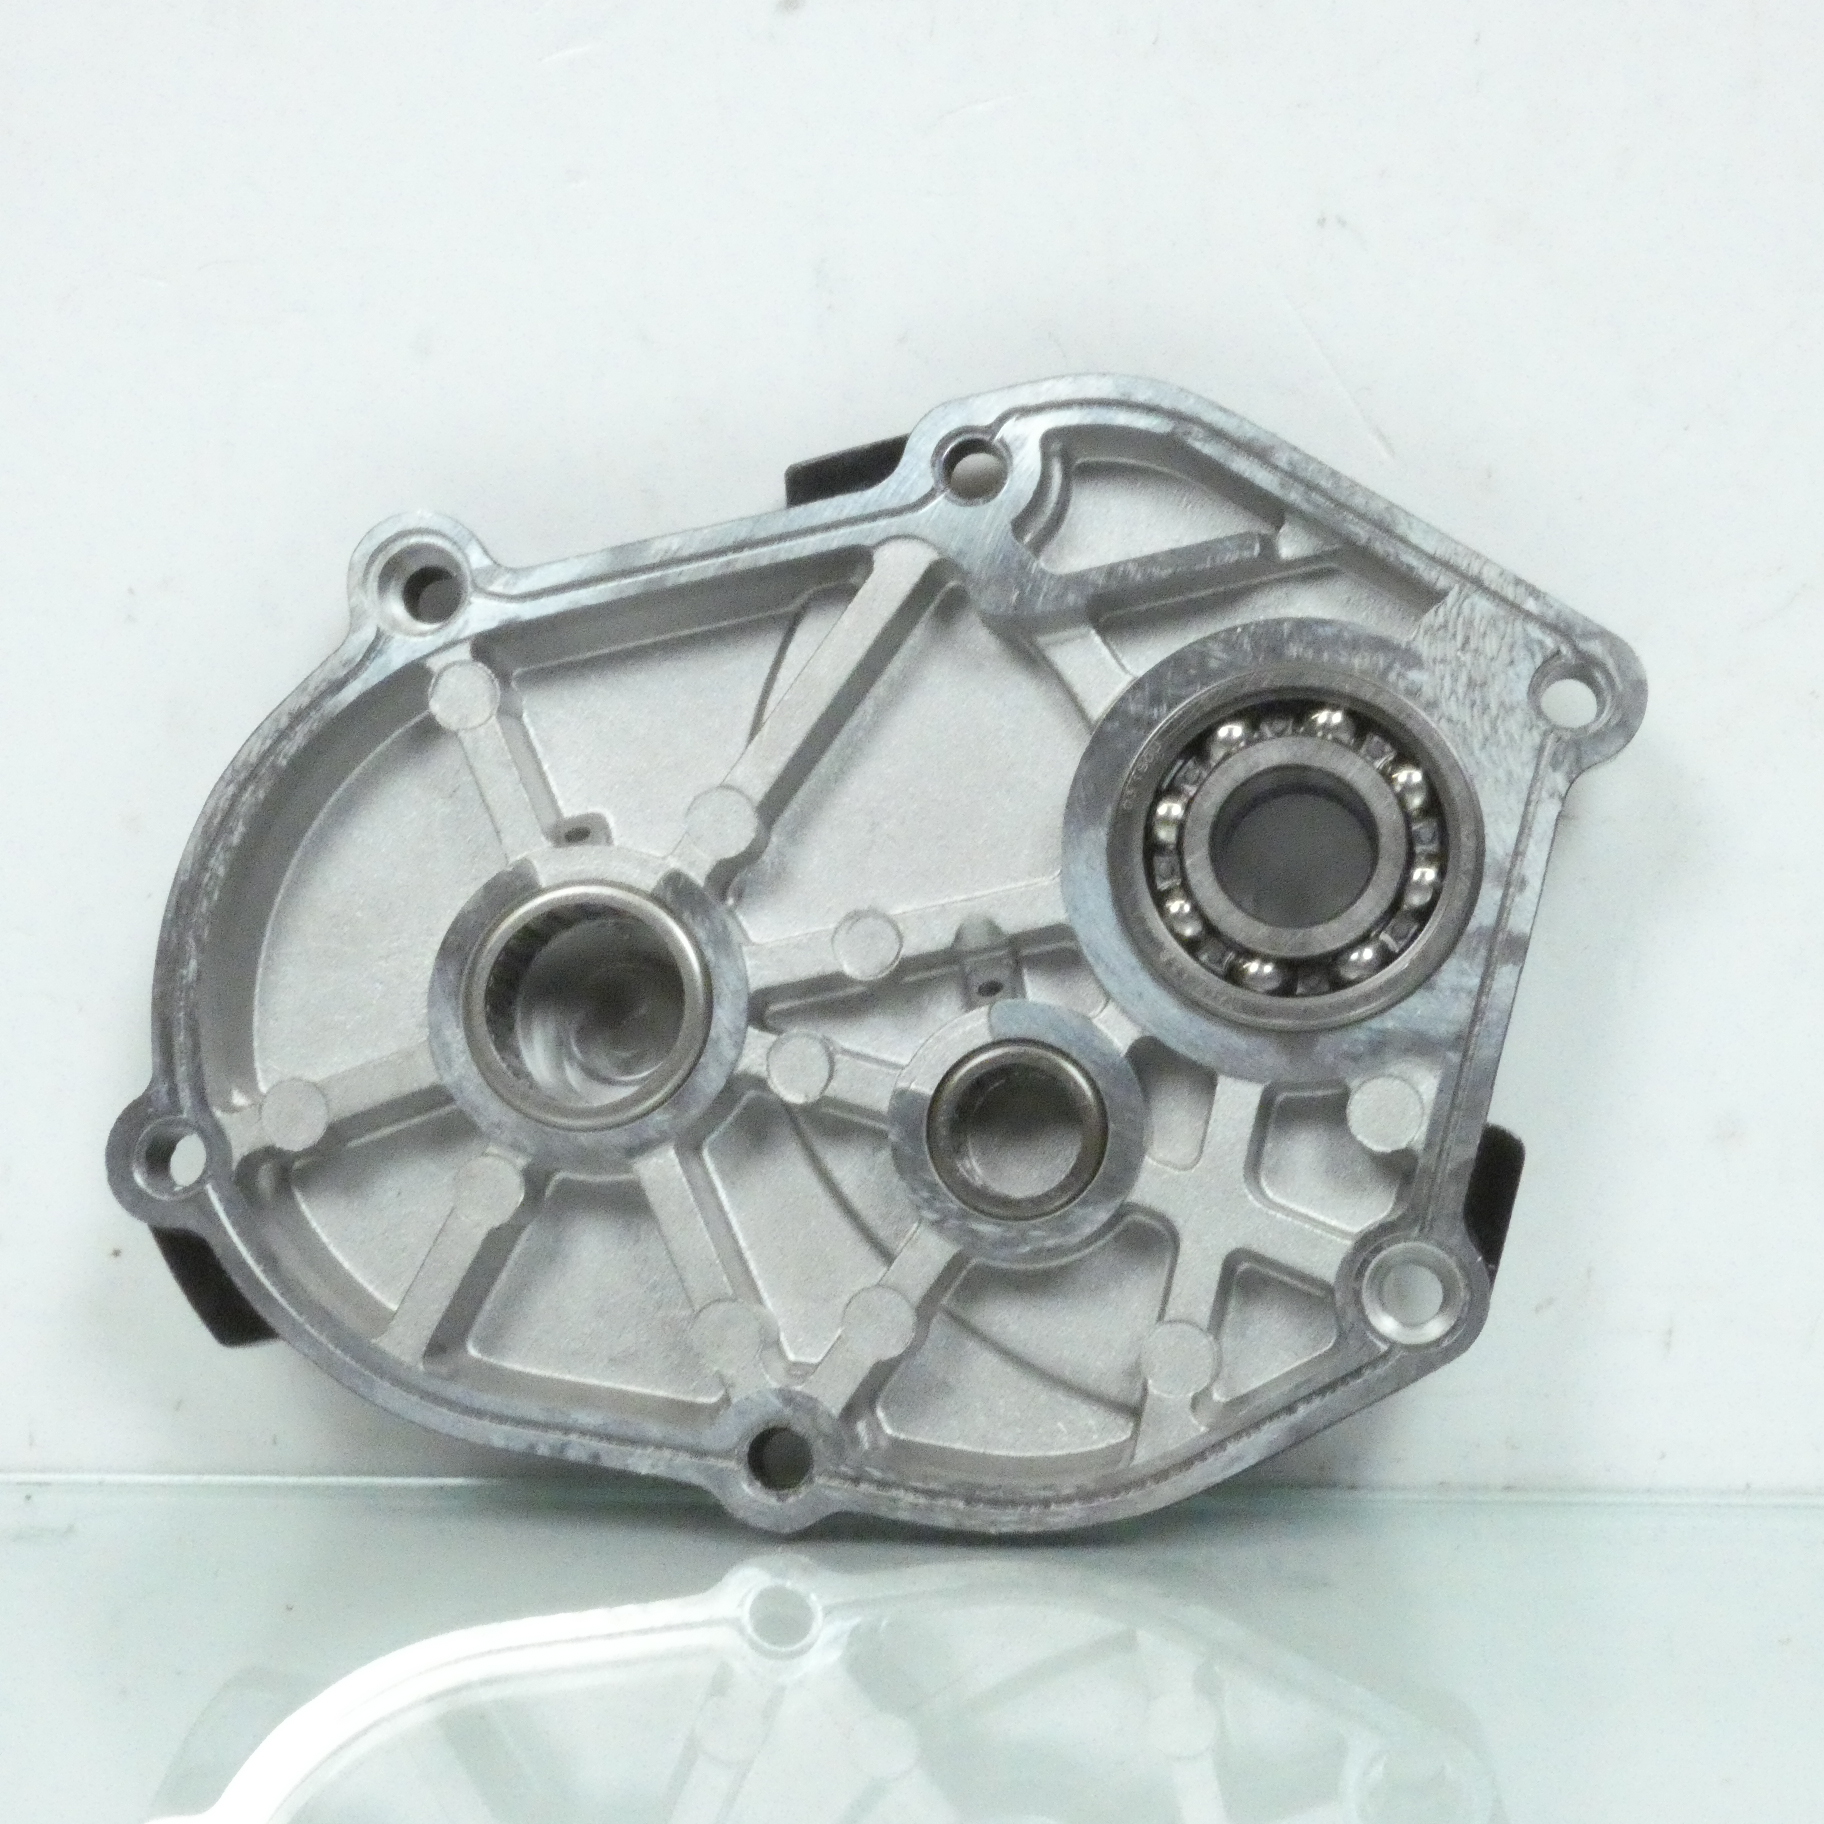 Carter de transmission Polini pour Scooter Yamaha 50 AXIS Neuf